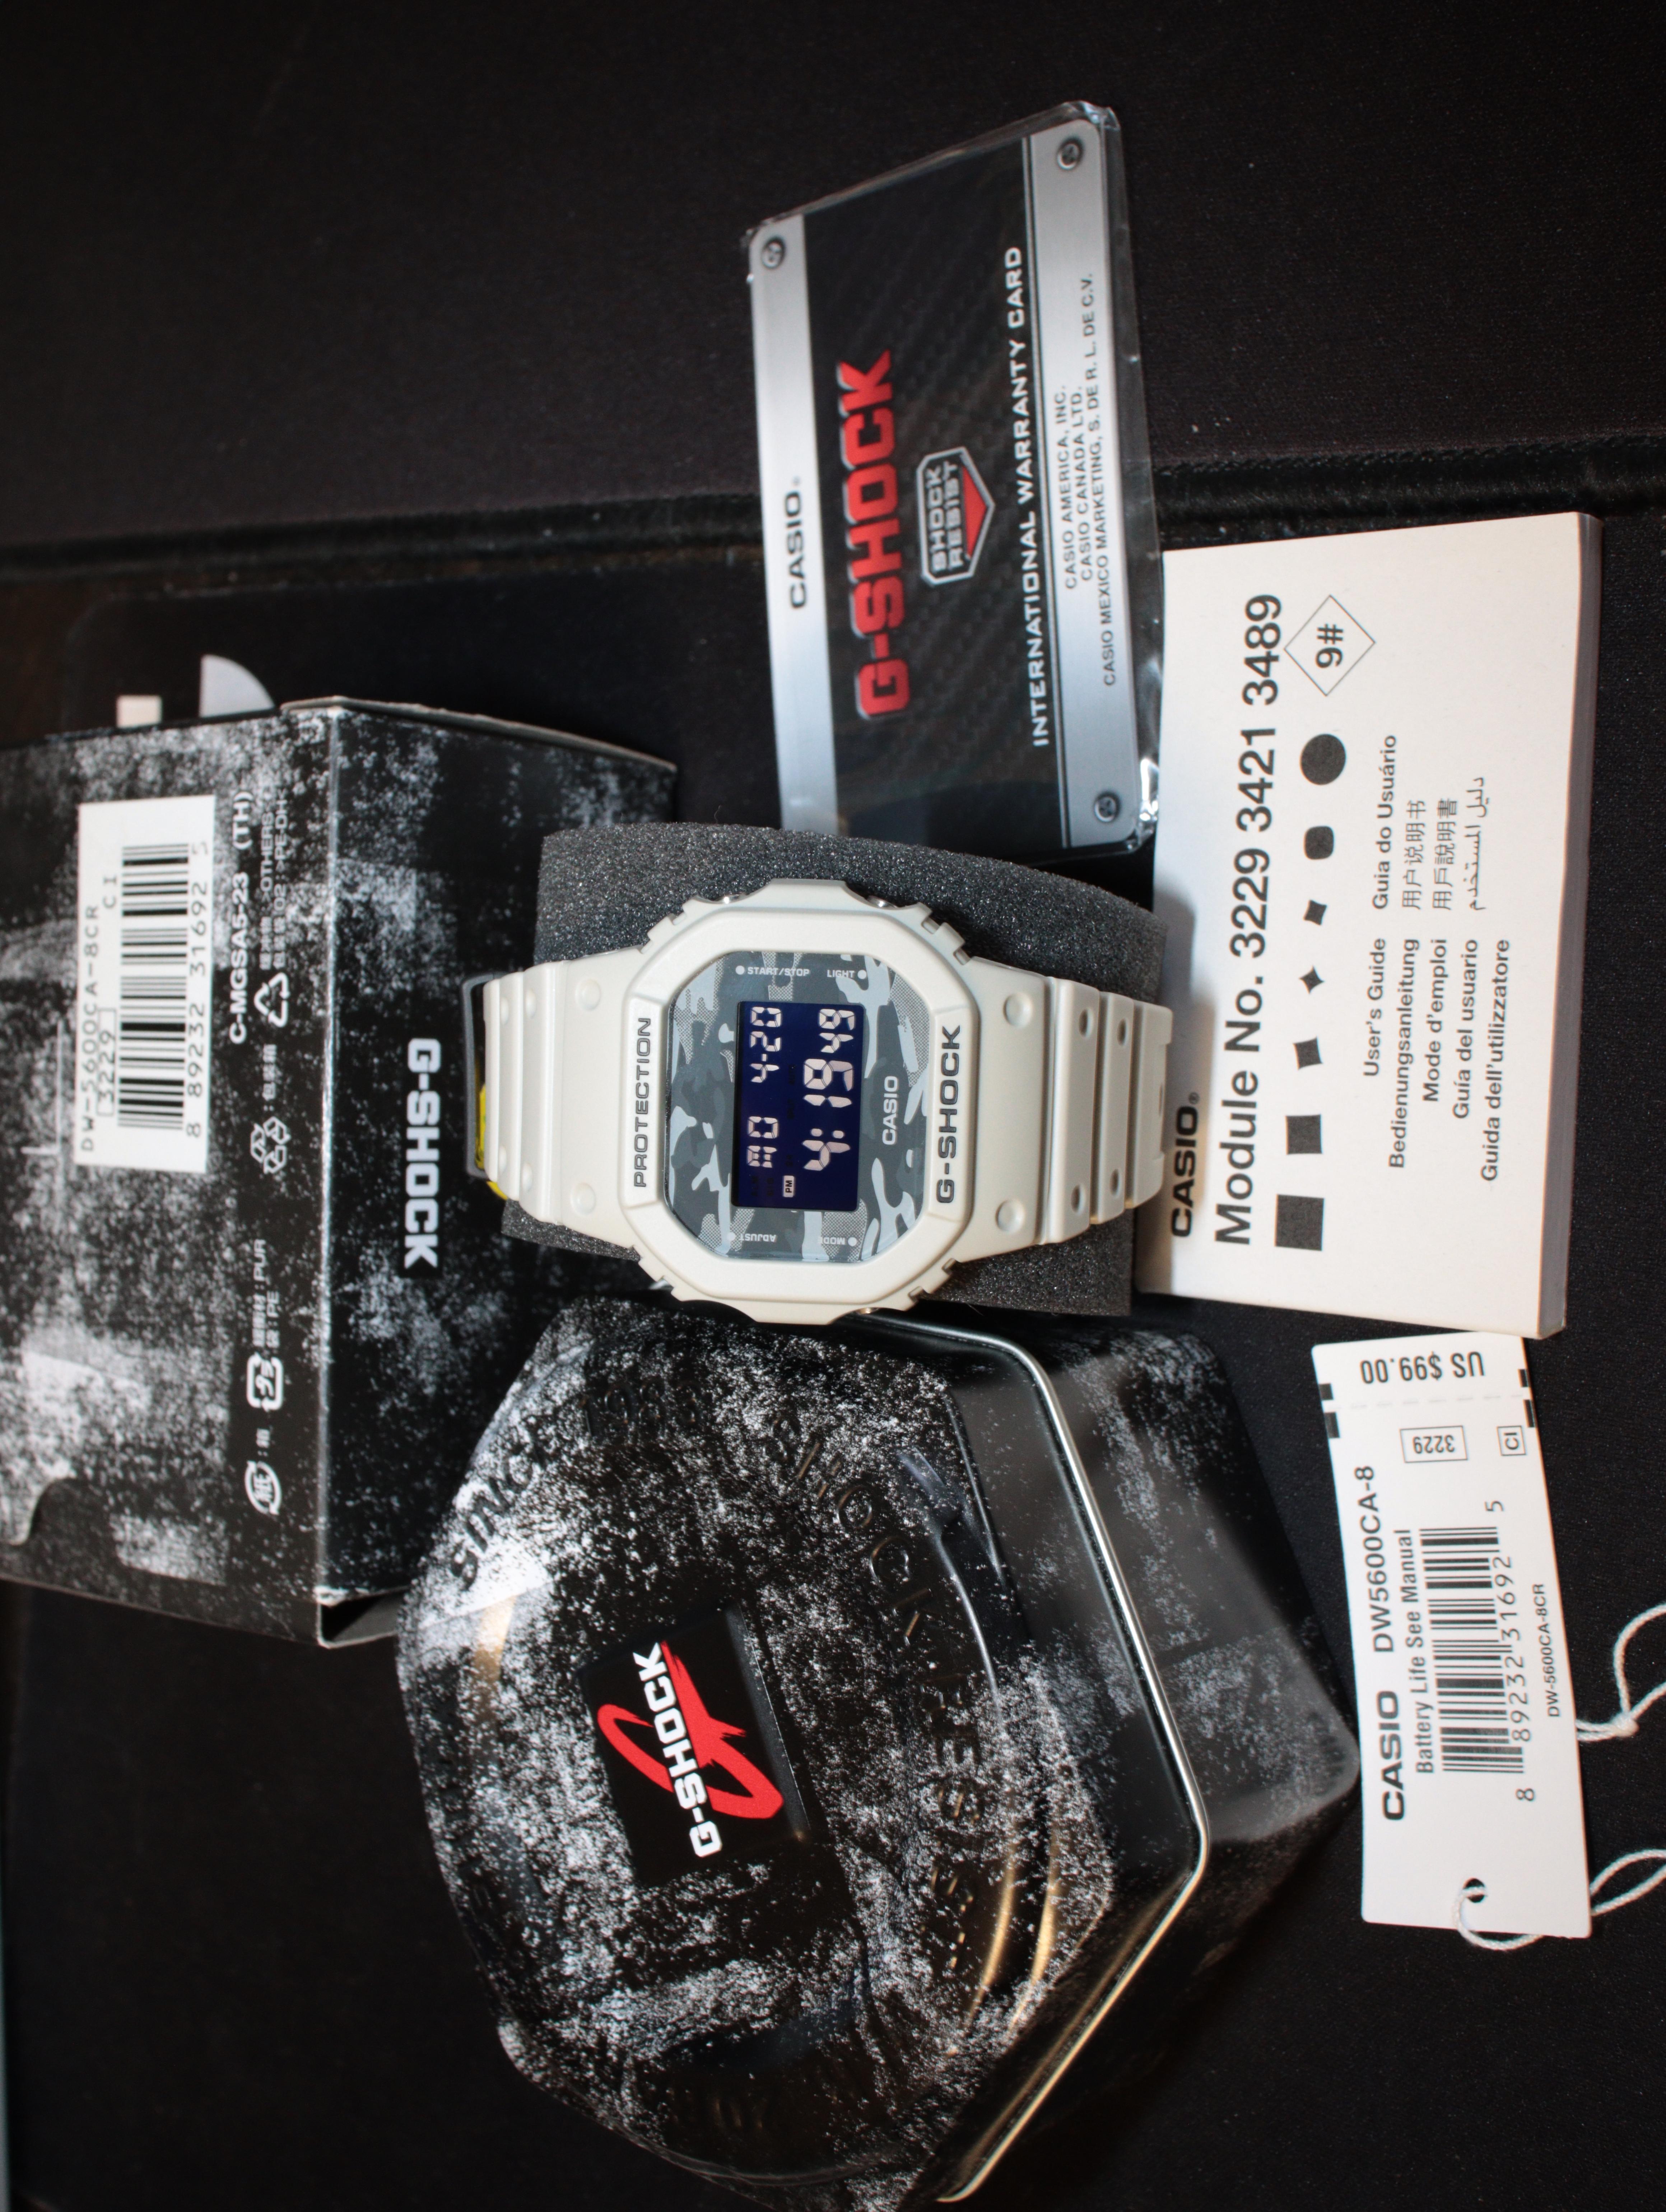 Marketplace WTS] price reduced | WatchCharts G-Shock Casio DW5600CA-8